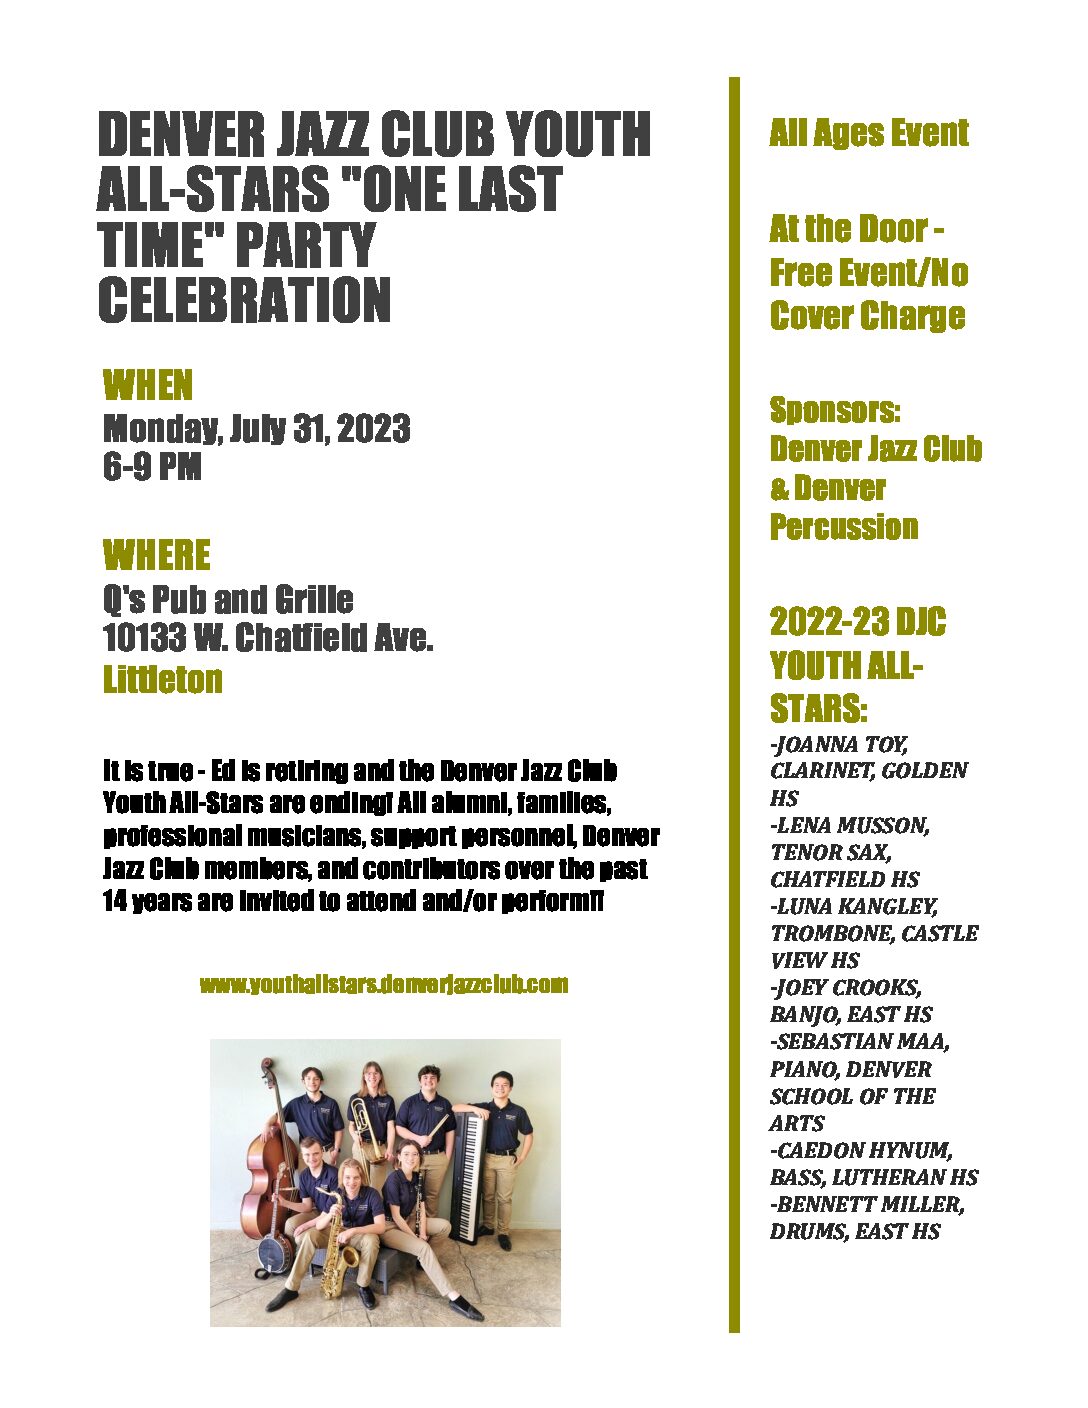 INVITATION TO ATTEND AND/OR PERFORM AT THE DENVER JAZZ CLUB YOUTH ALL-STARS “ONE LAST TIME” PARTY CELEBRATION ON MONDAY, JULY 31ST AT Q’S PUB & GRILLE